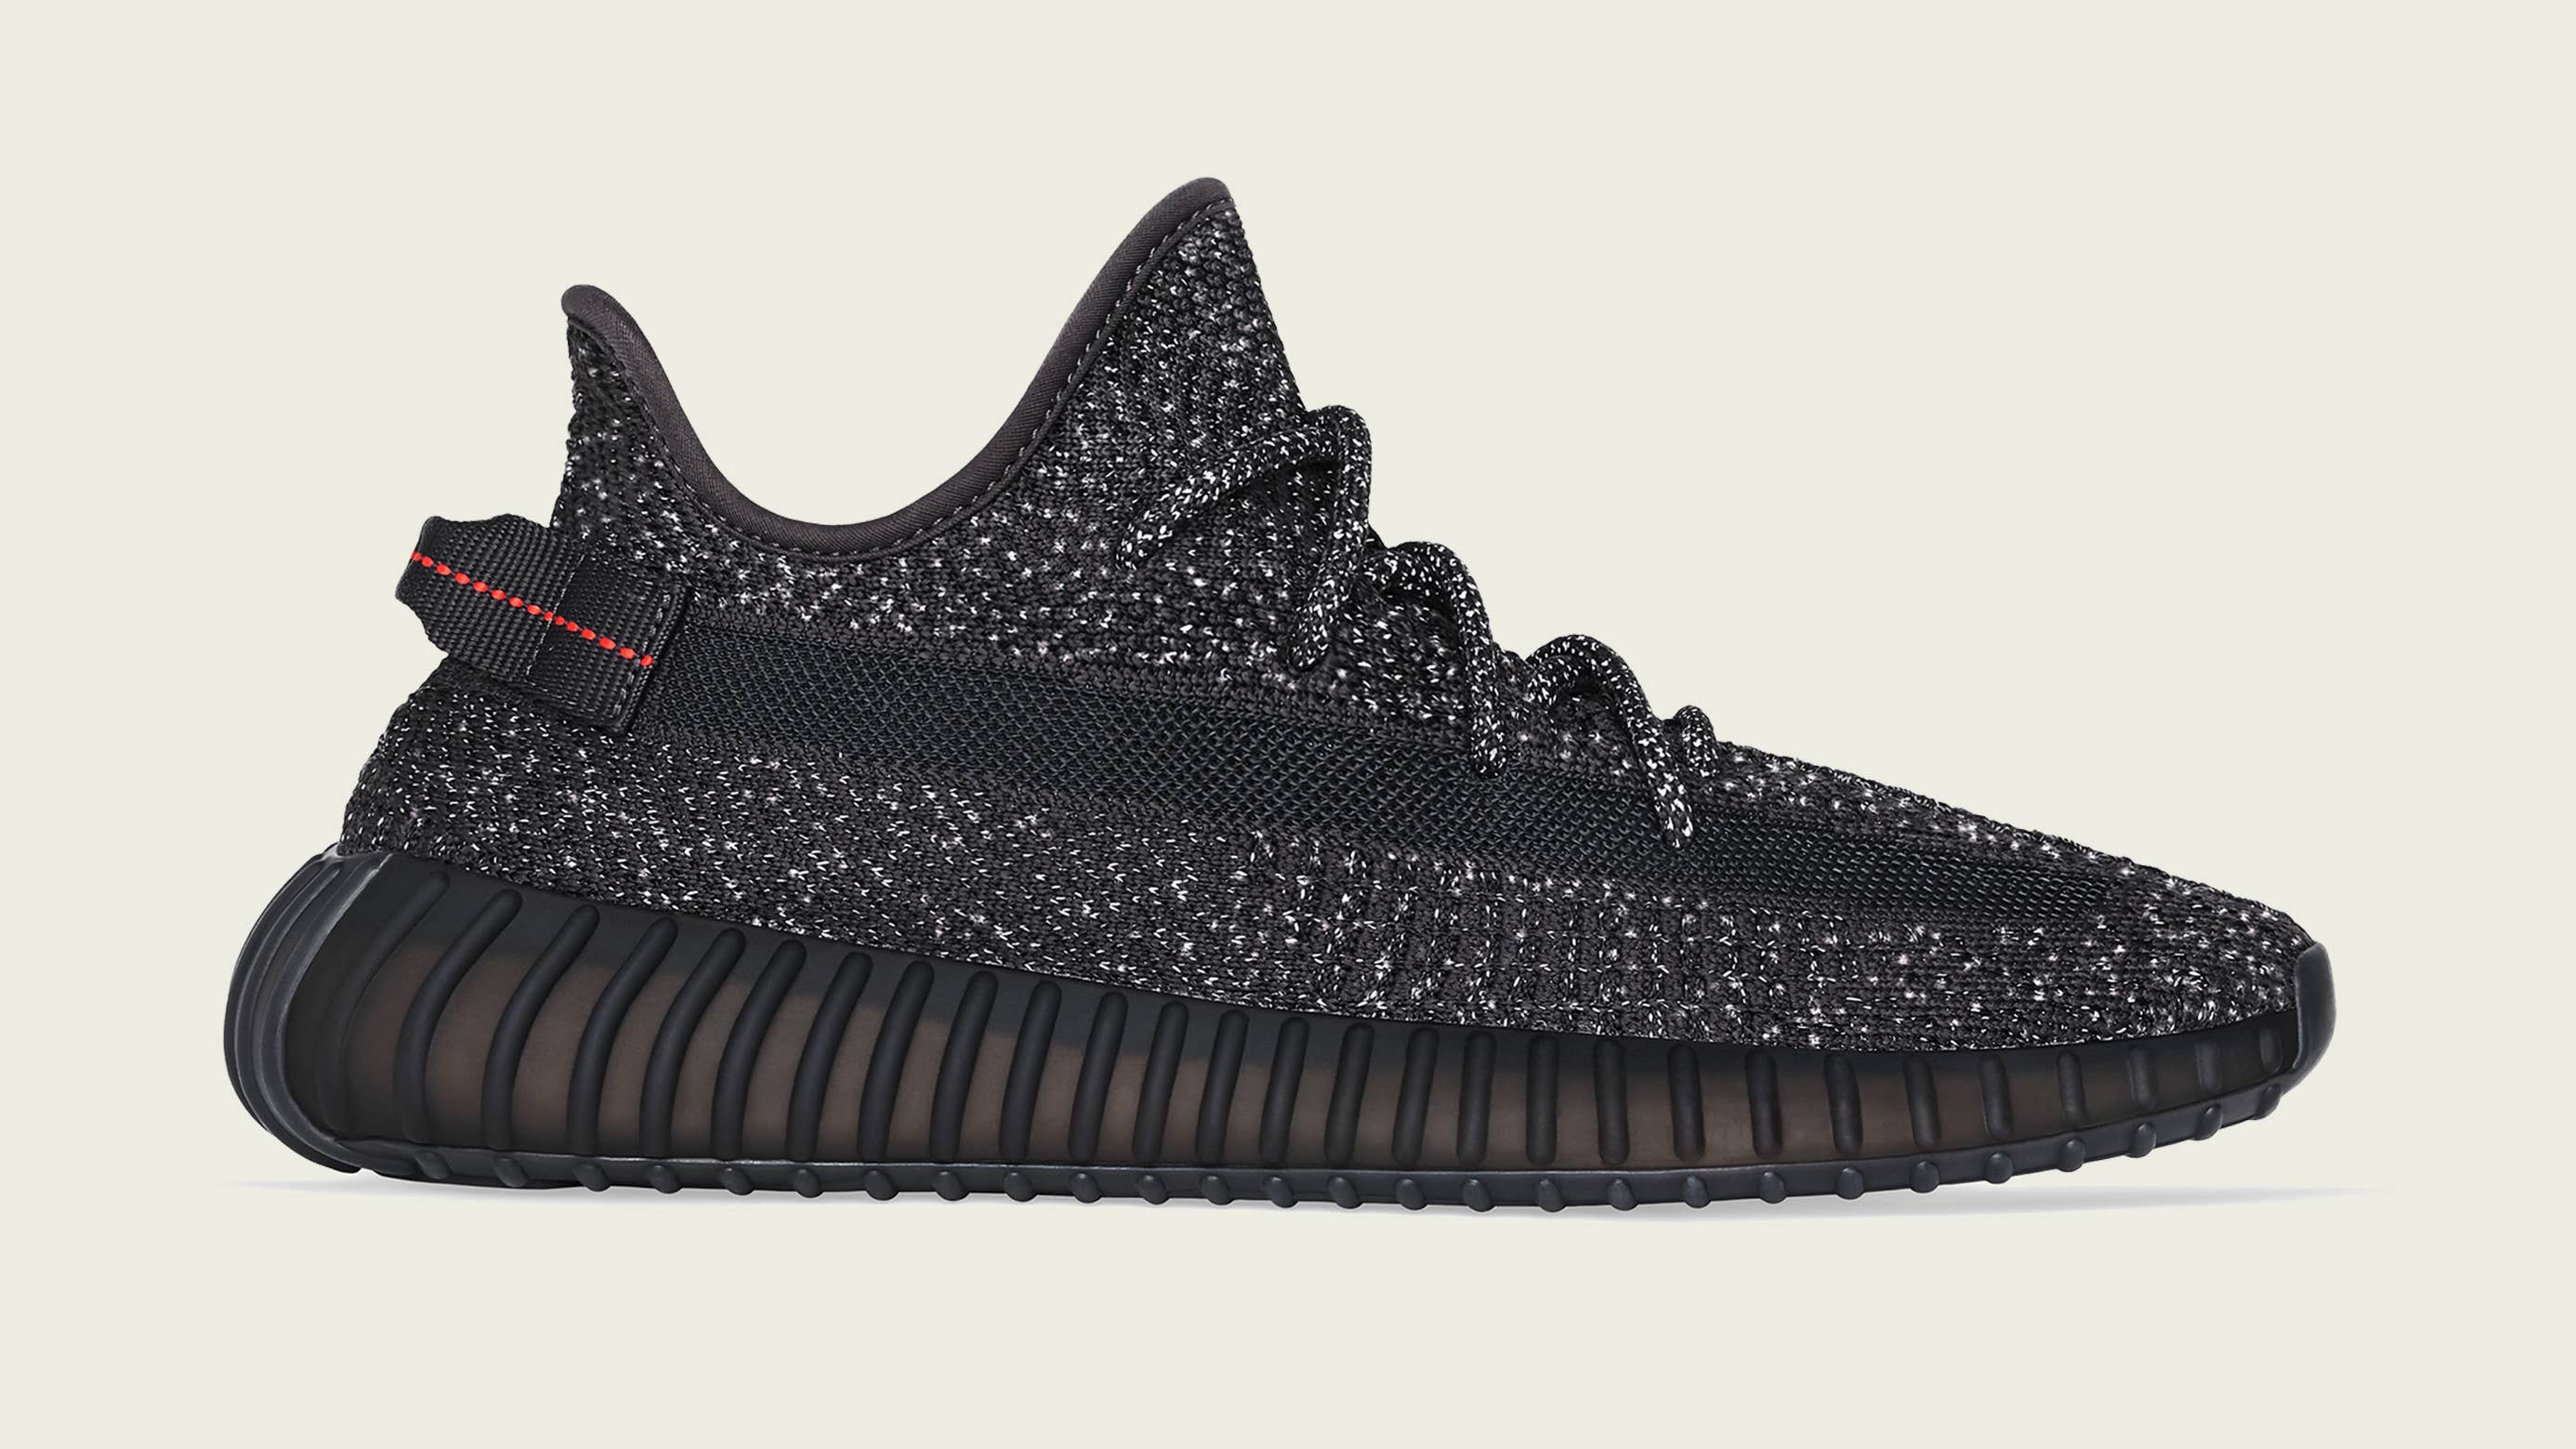 Adidas Yeezy Boost 350 V2 'Black Reflective' (Lateral)